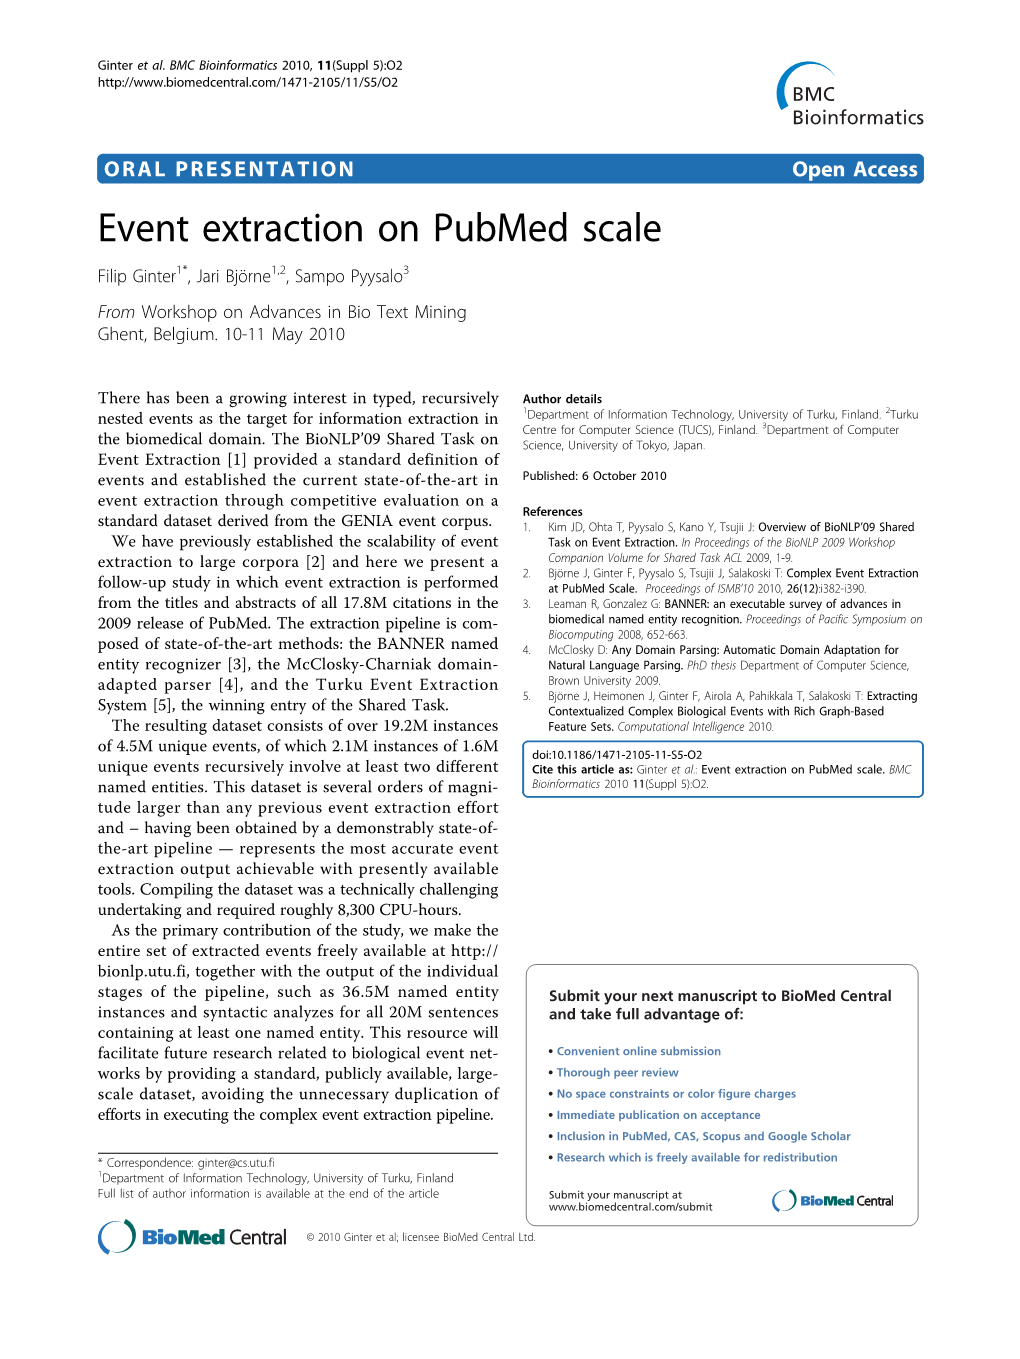 Event Extraction on Pubmed Scale Filip Ginter1*, Jari Björne1,2, Sampo Pyysalo3 from Workshop on Advances in Bio Text Mining Ghent, Belgium